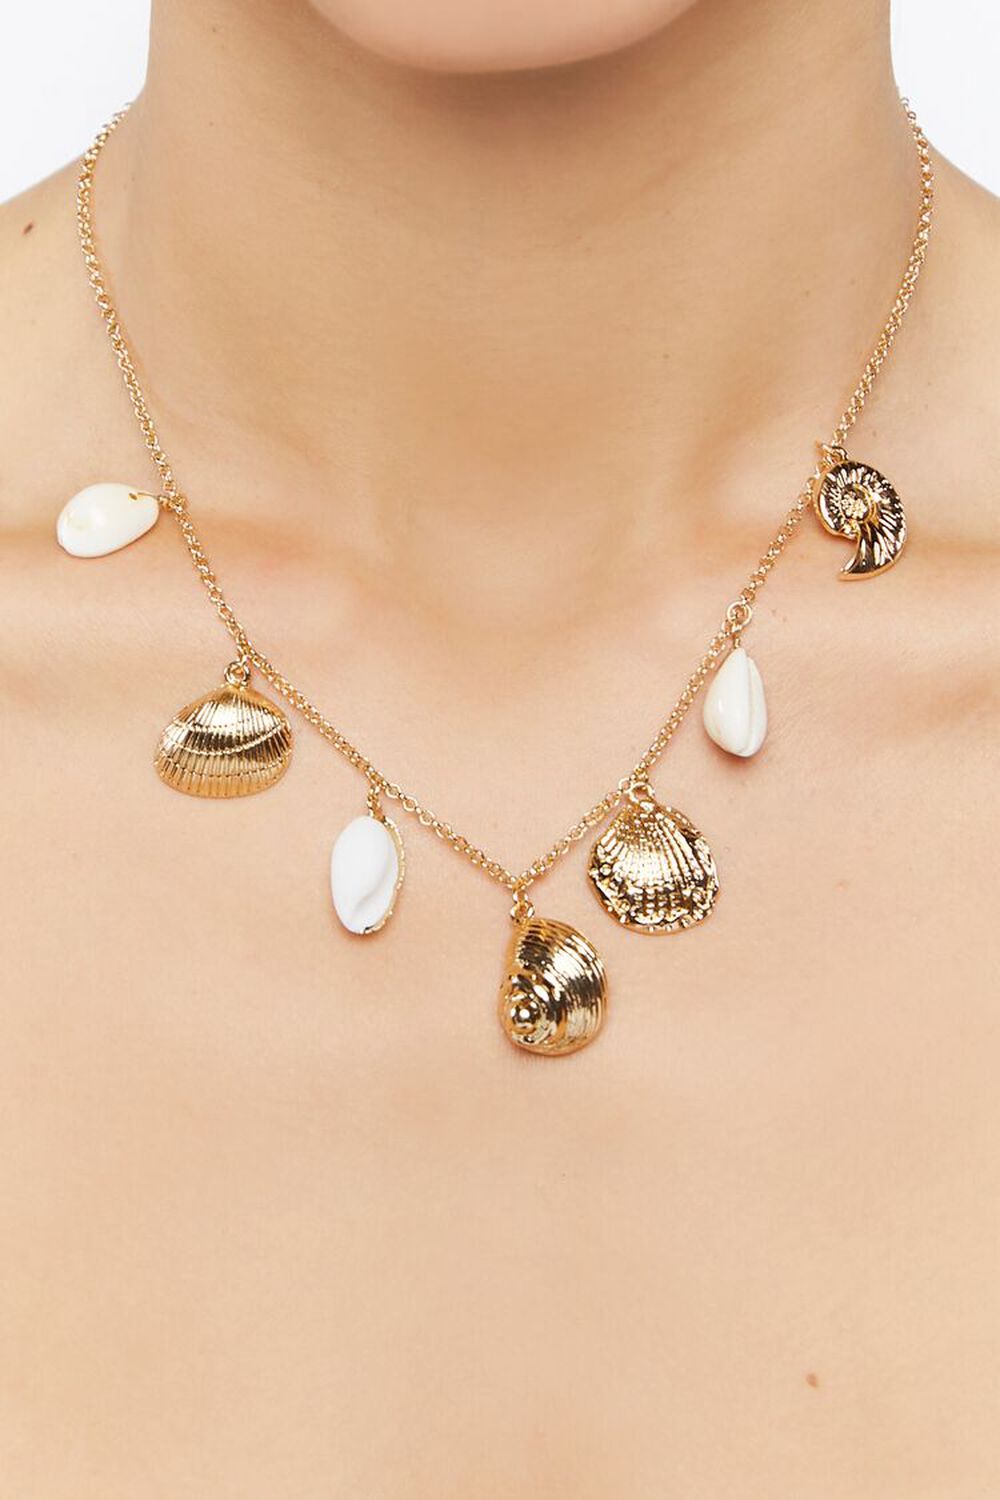 WHITE/GOLD Seashell Charm Chain Necklace, image 1